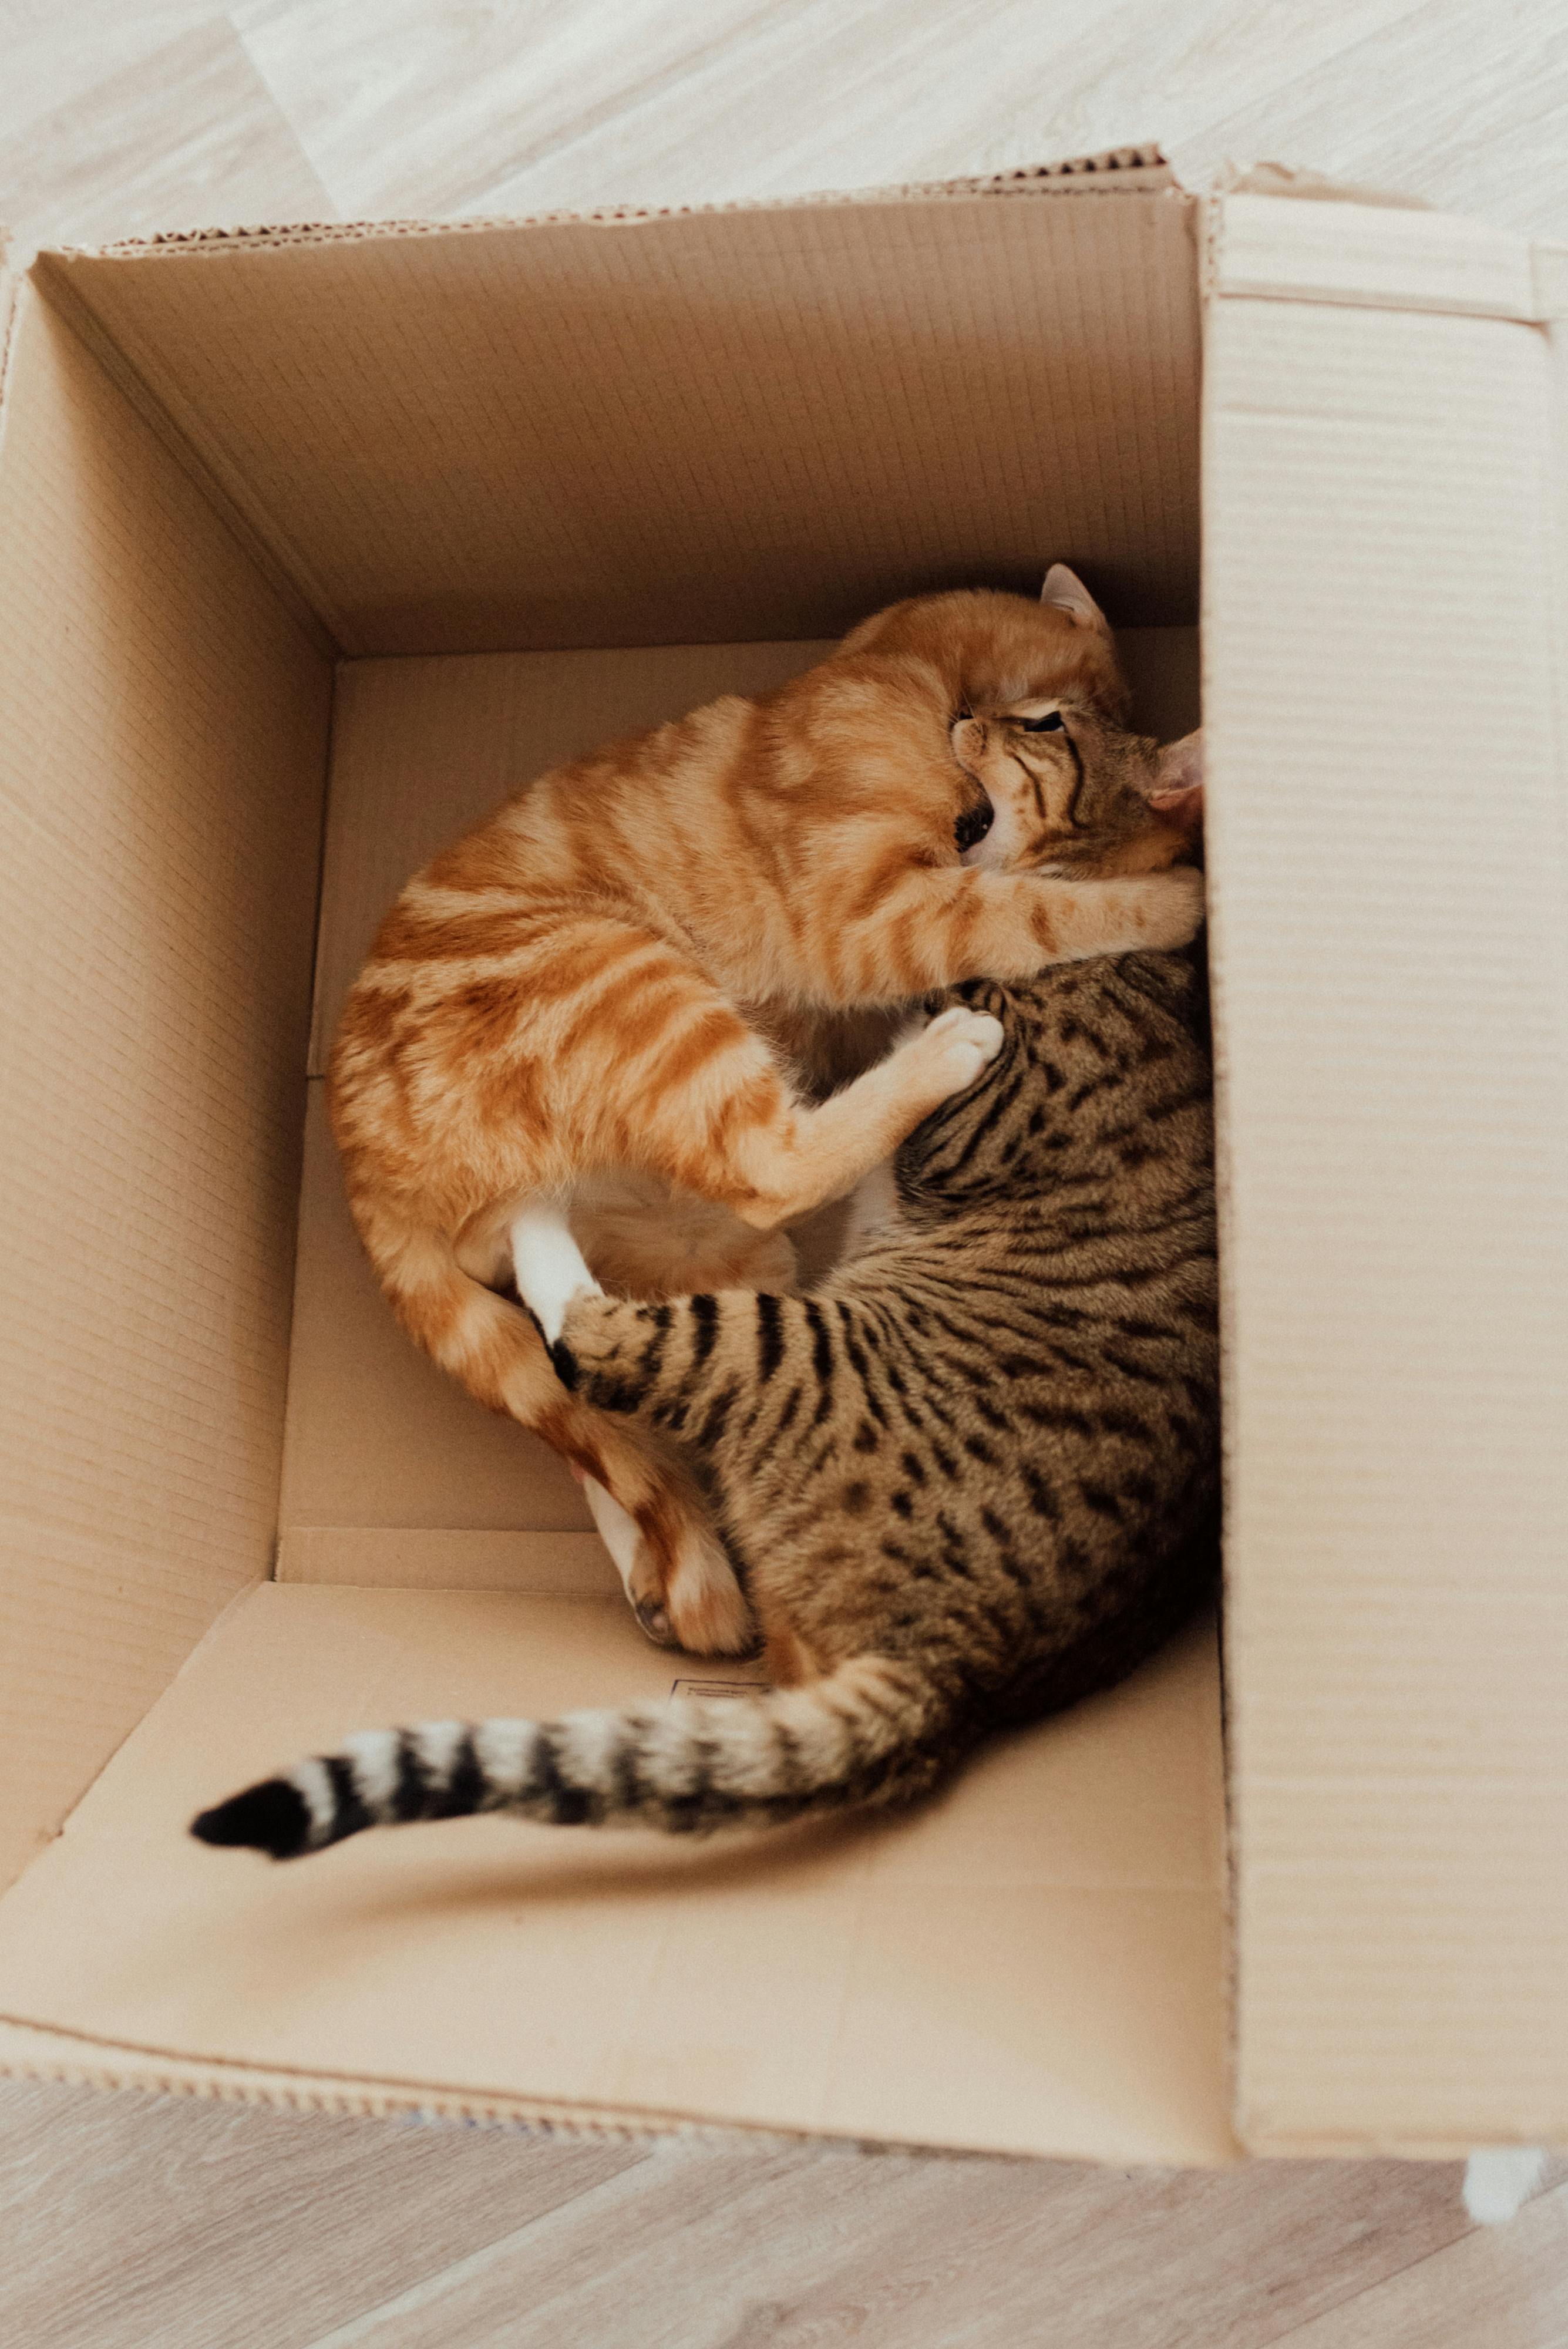 Cats playing in a box